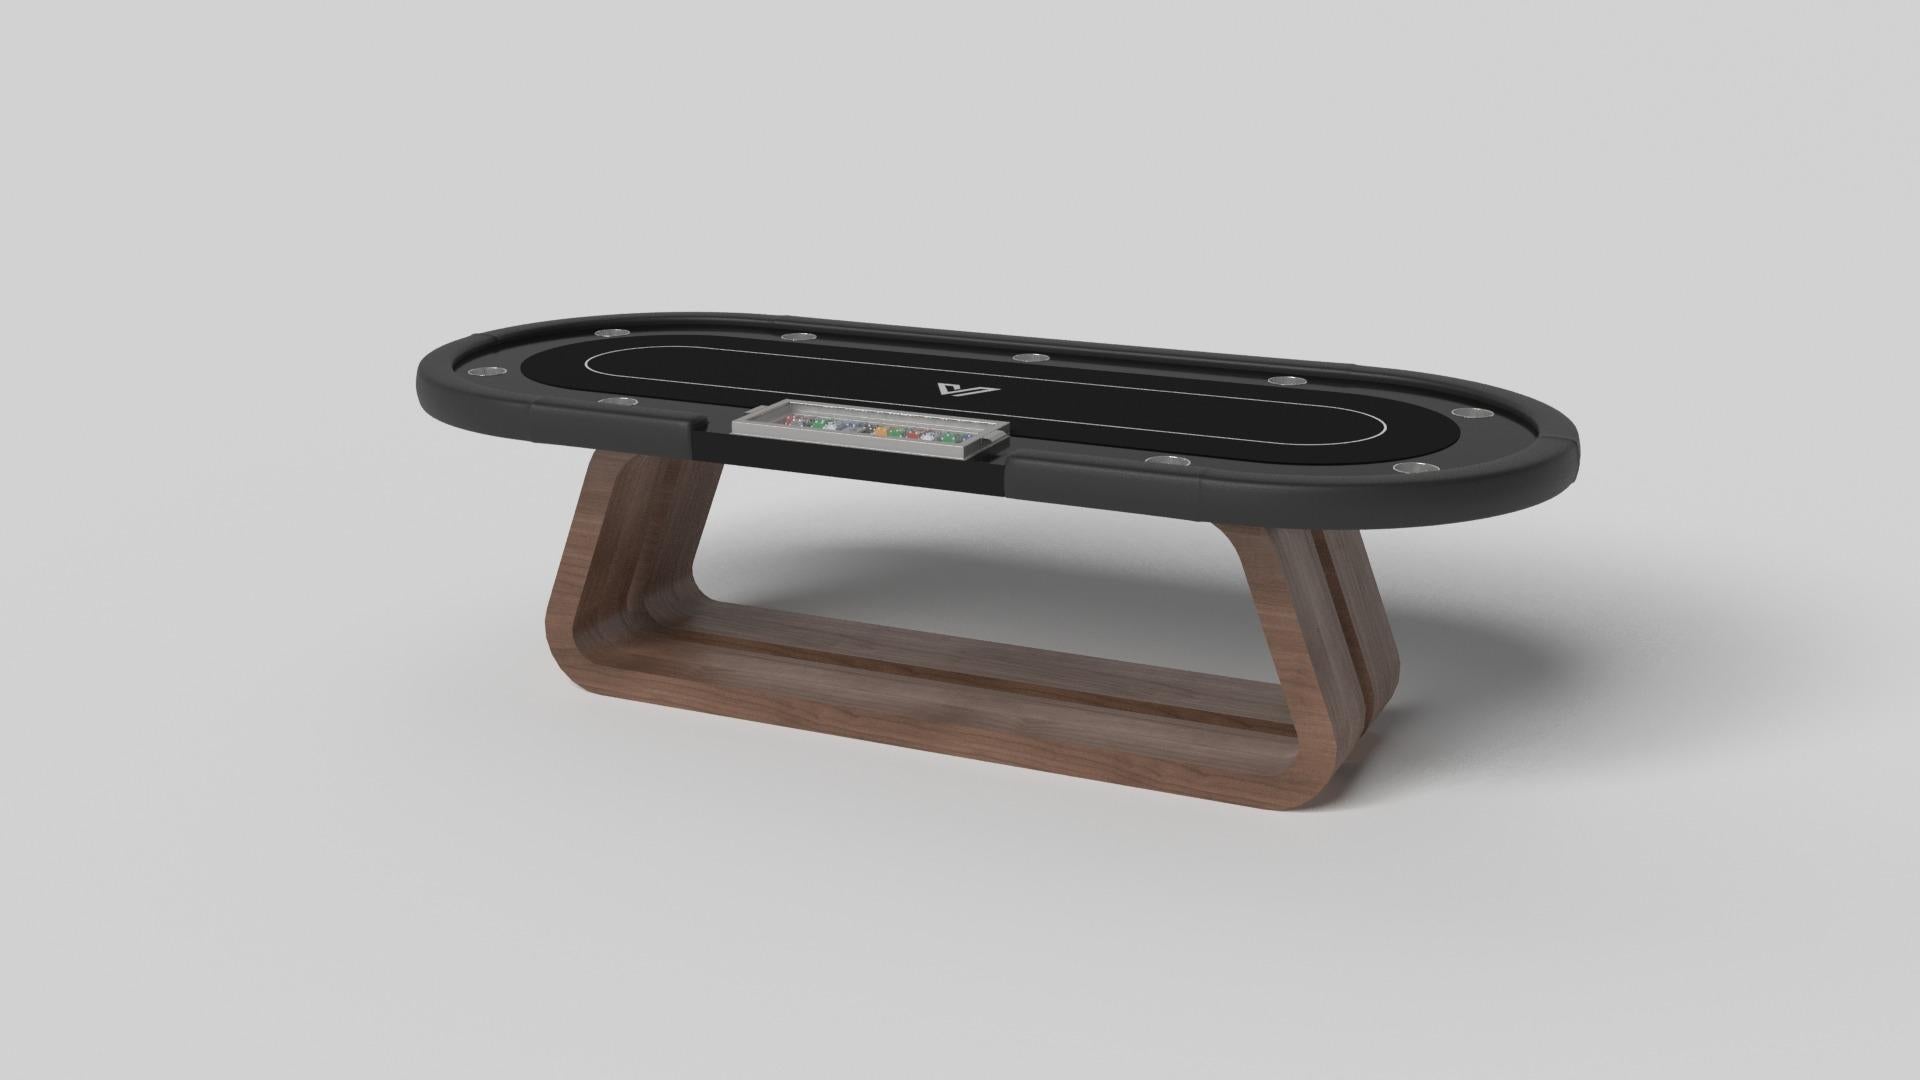 An open base with sweeping curves and smooth edges imparts a light, airy feel upon the Luge poker table in walnut. Evoking a sense of speed and the spirit of continuous movement, this exclusive wood game table features a split base with open sides